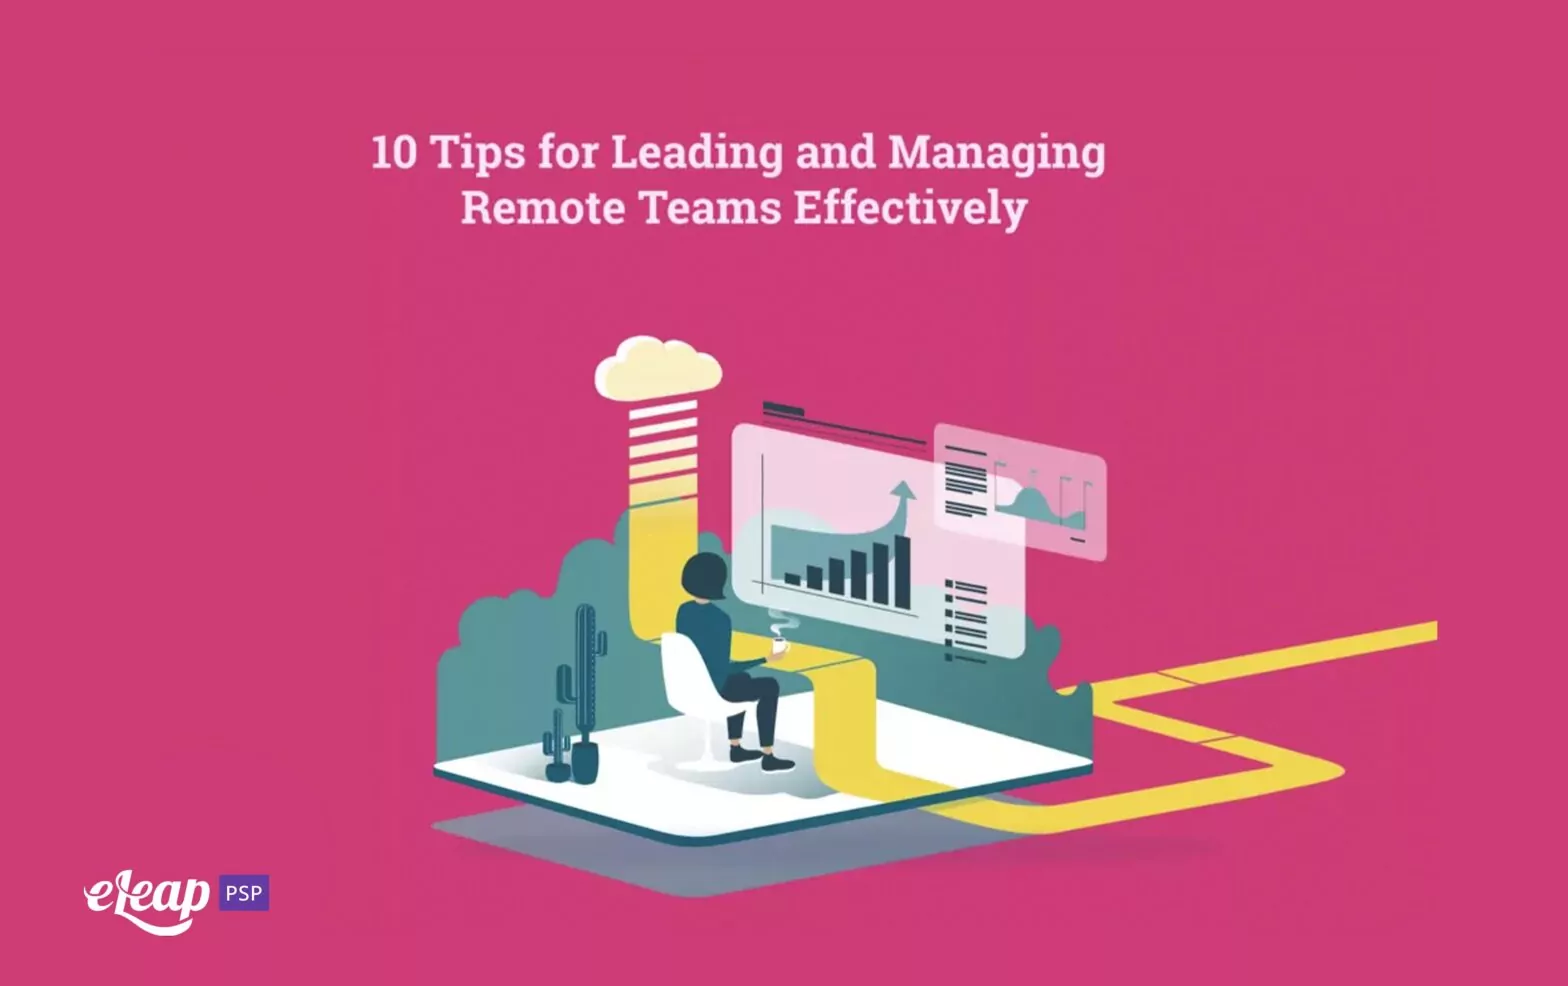 10 Tips for Leading and Managing Remote Teams Effectively